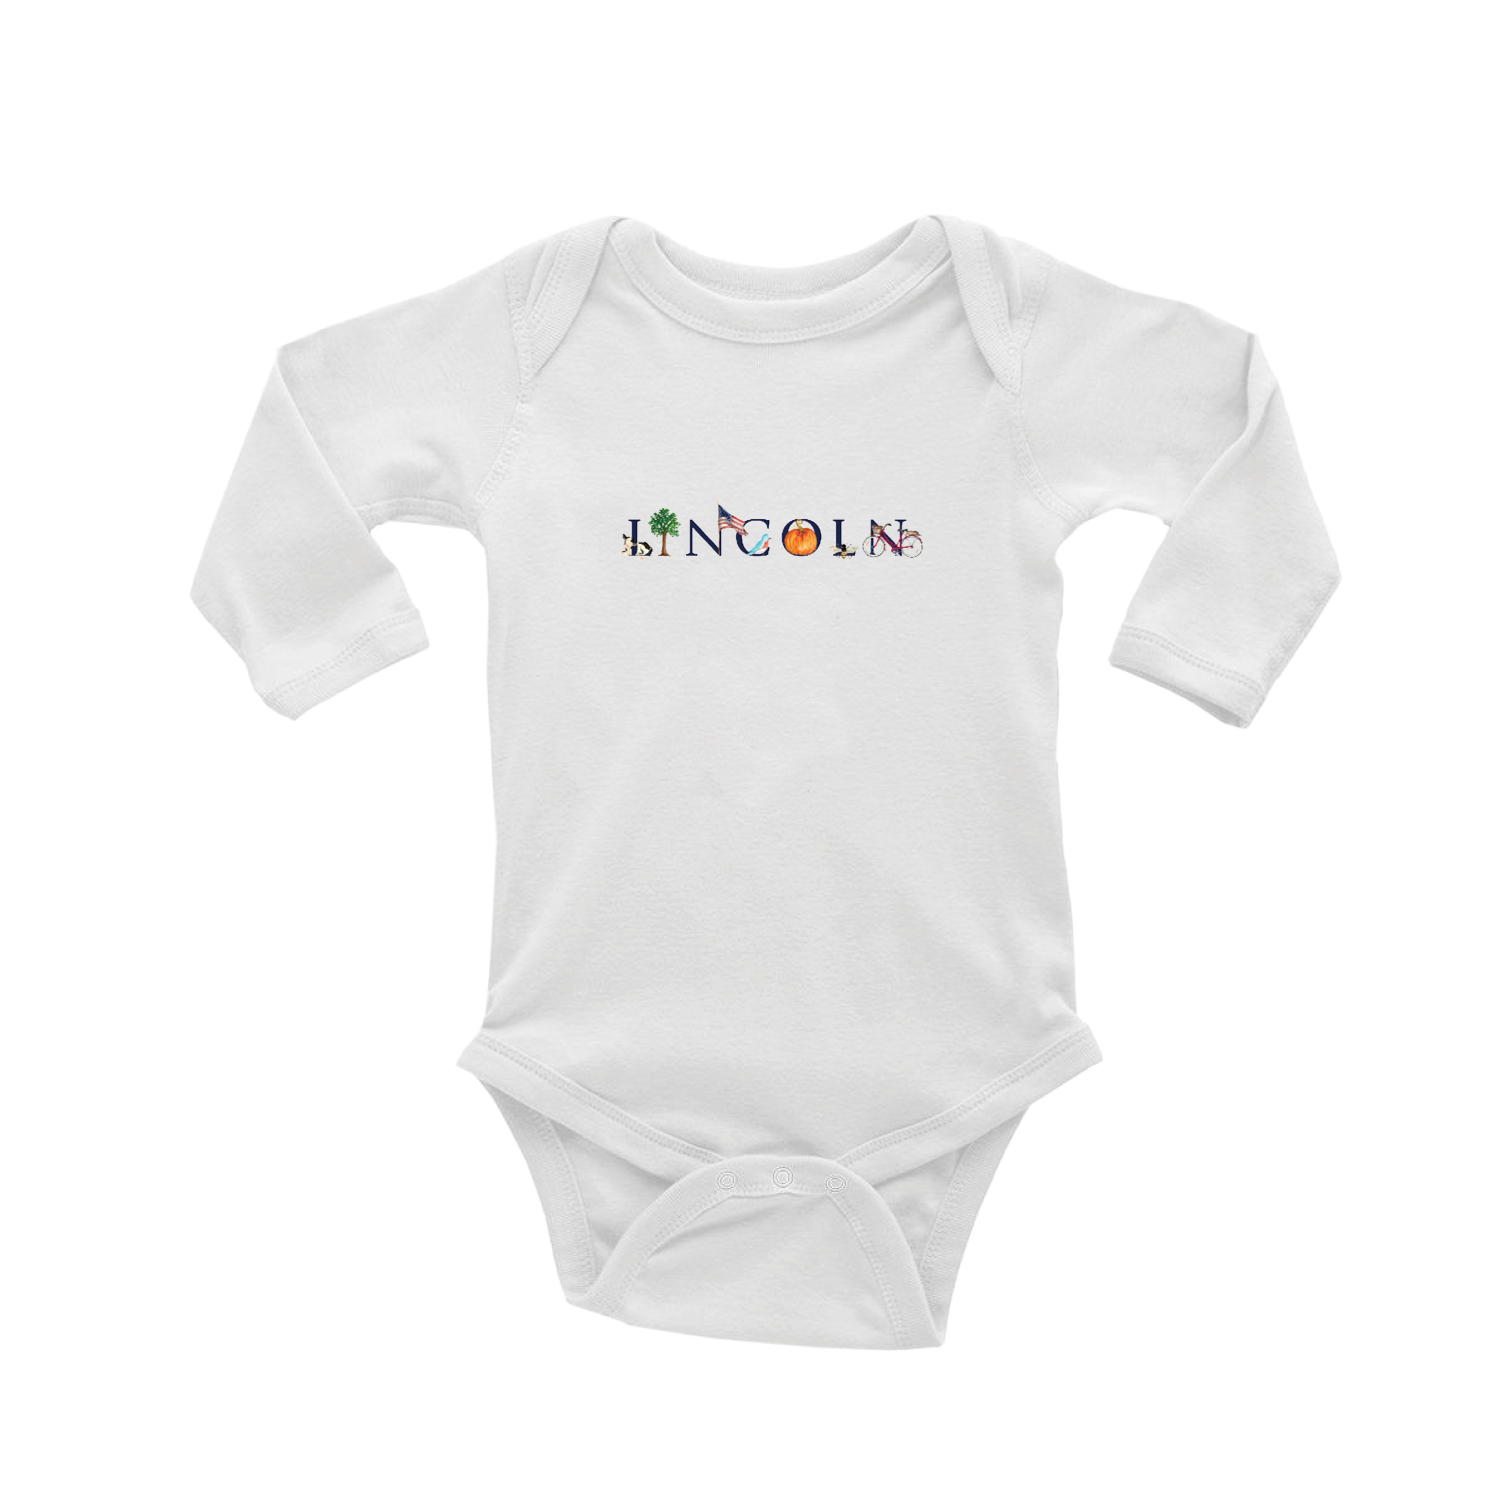 Lincoln baby snap up long sleeve